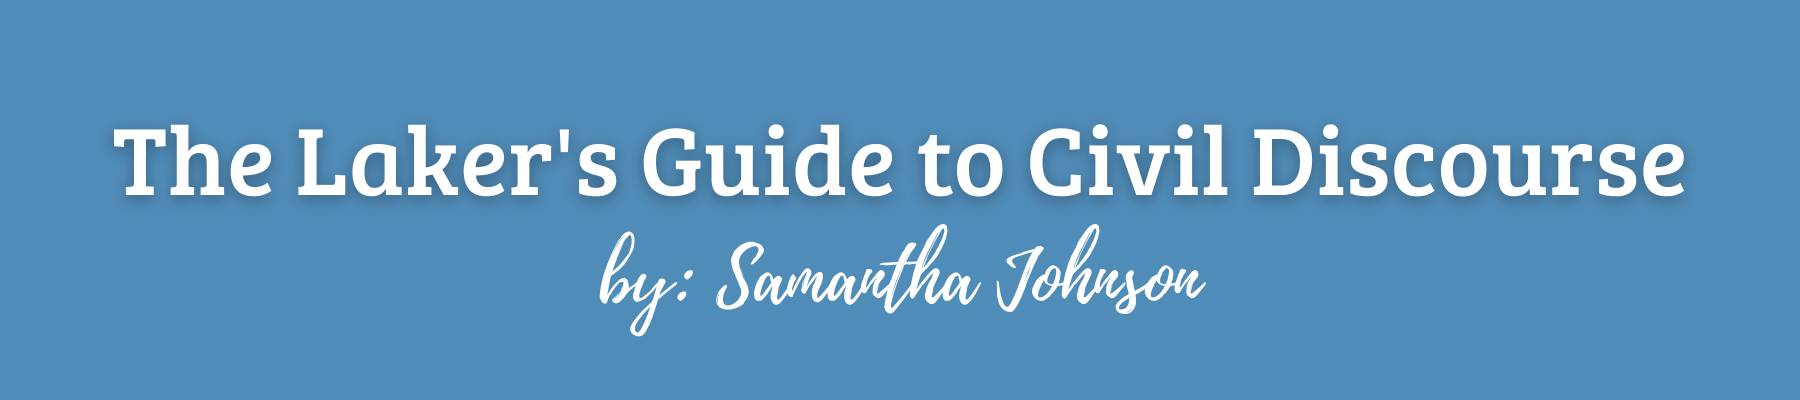 The Laker's Guide to Civil Discourse by Samantha Johnson